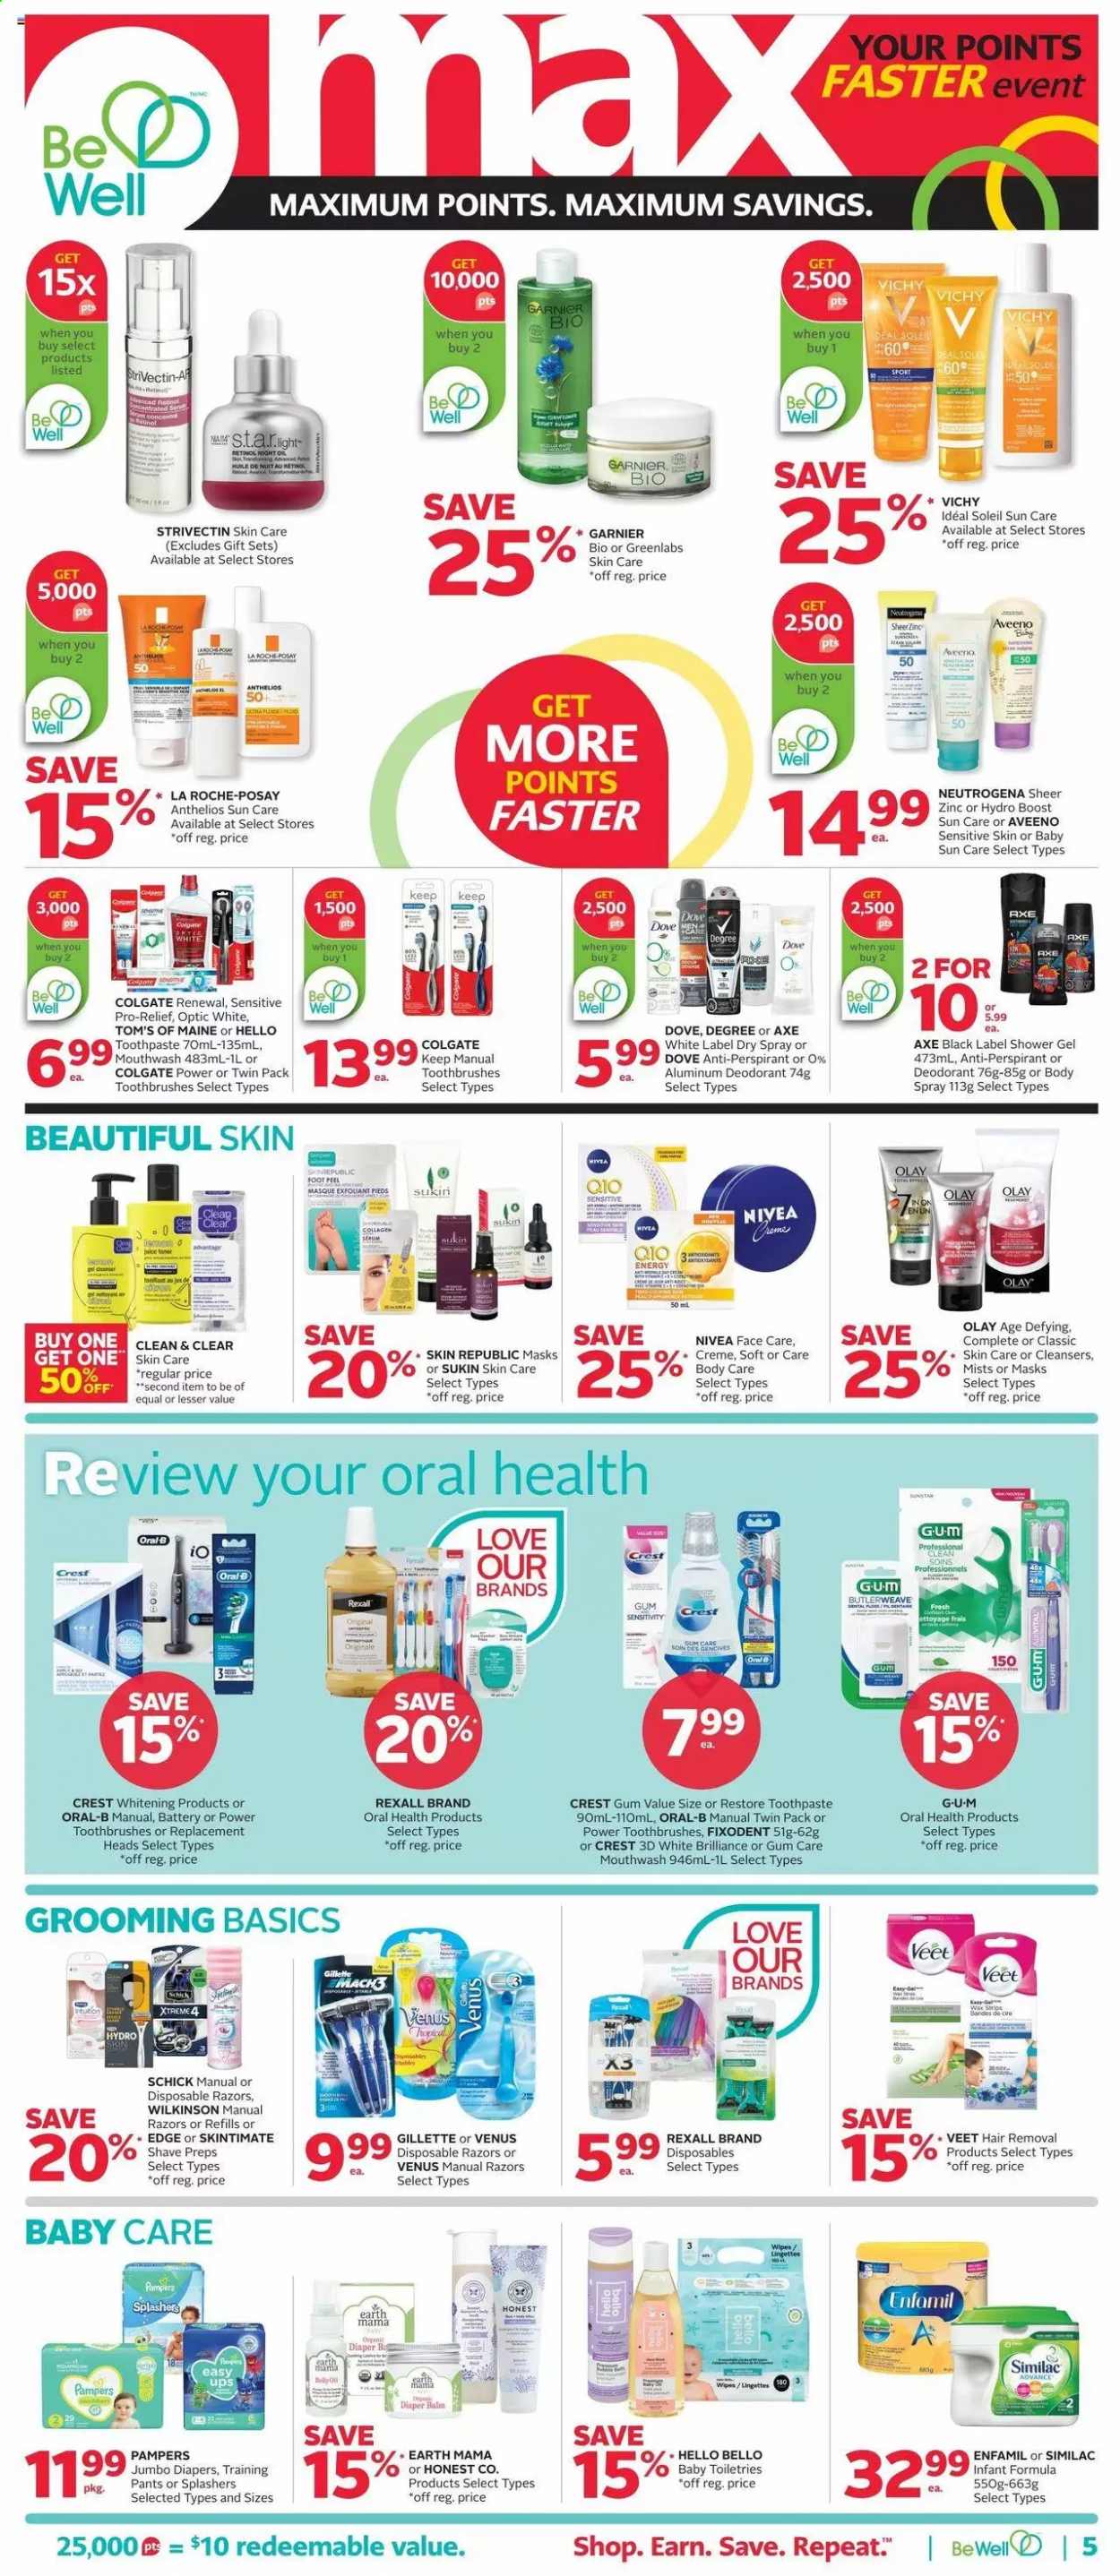 thumbnail - Rexall Flyer - July 16, 2021 - July 22, 2021 - Sales products - Boost, Enfamil, Similac, pants, nappies, baby pants, Aveeno, shower gel, Vichy, toothpaste, mouthwash, Fixodent, Crest, La Roche-Posay, Olay, Clean & Clear, Sukin, body spray, anti-perspirant, Schick, Venus, hair removal, Veet, disposable razor, zinc, Garnier, Gillette, Neutrogena, Pampers, Nivea, Oral-B, deodorant. Page 5.